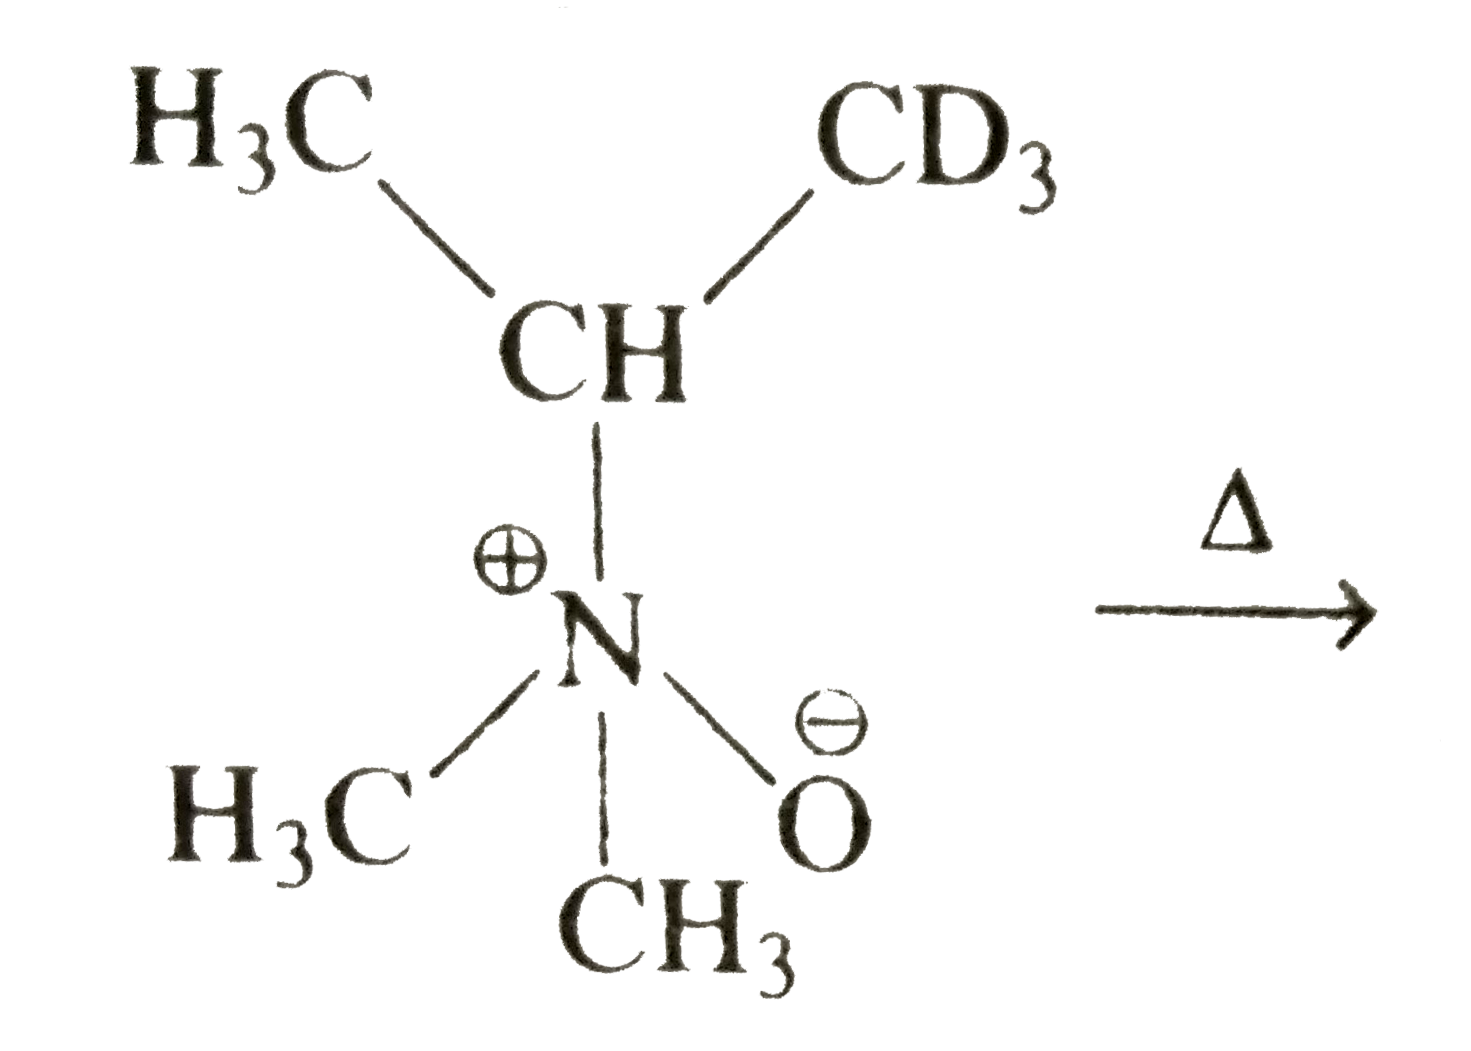 The major product formed in the reaction is: